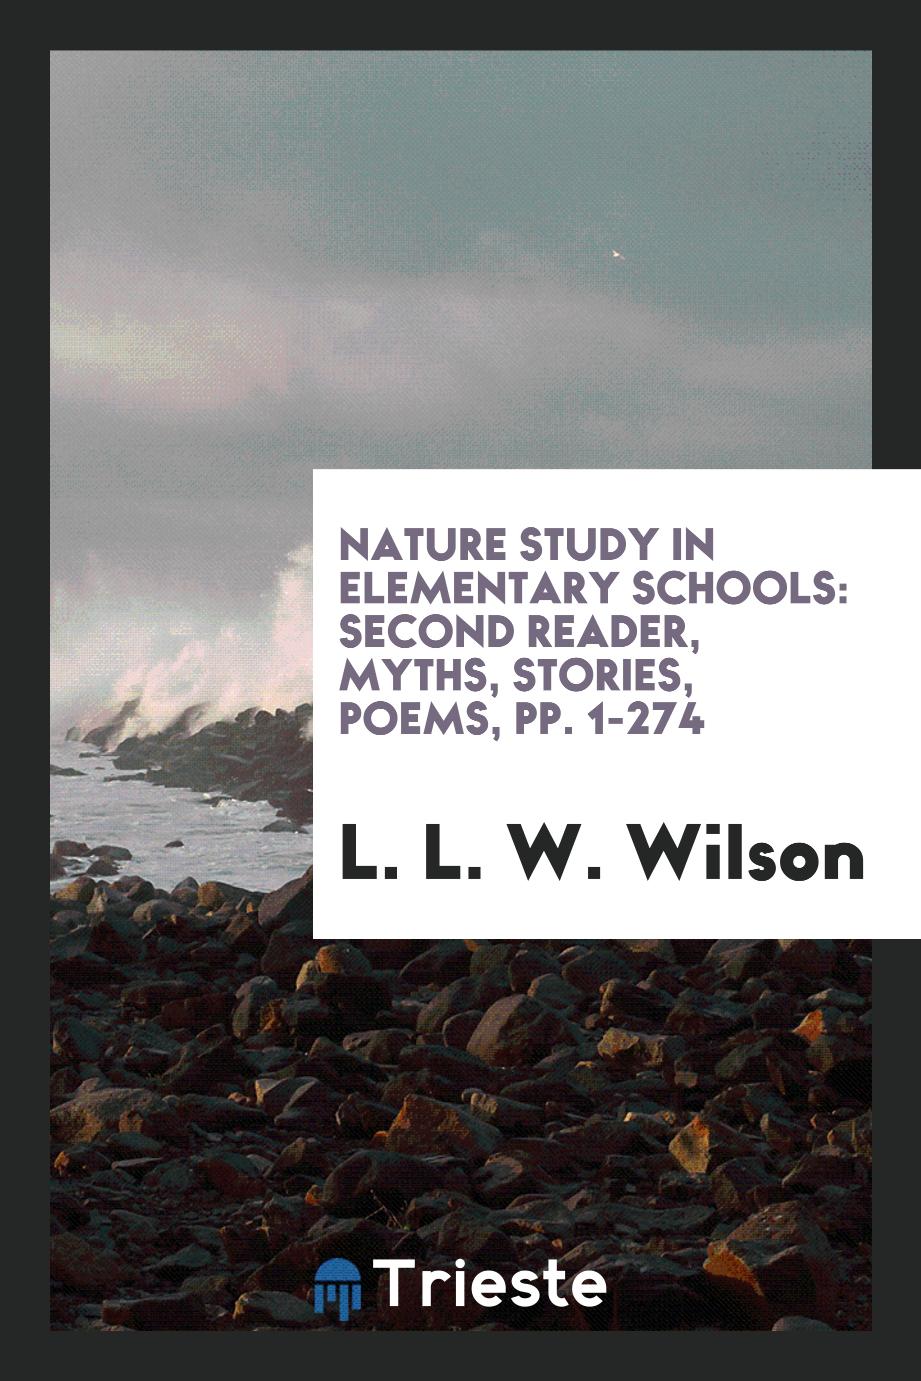 Nature Study in Elementary Schools: Second Reader, Myths, Stories, Poems, pp. 1-274